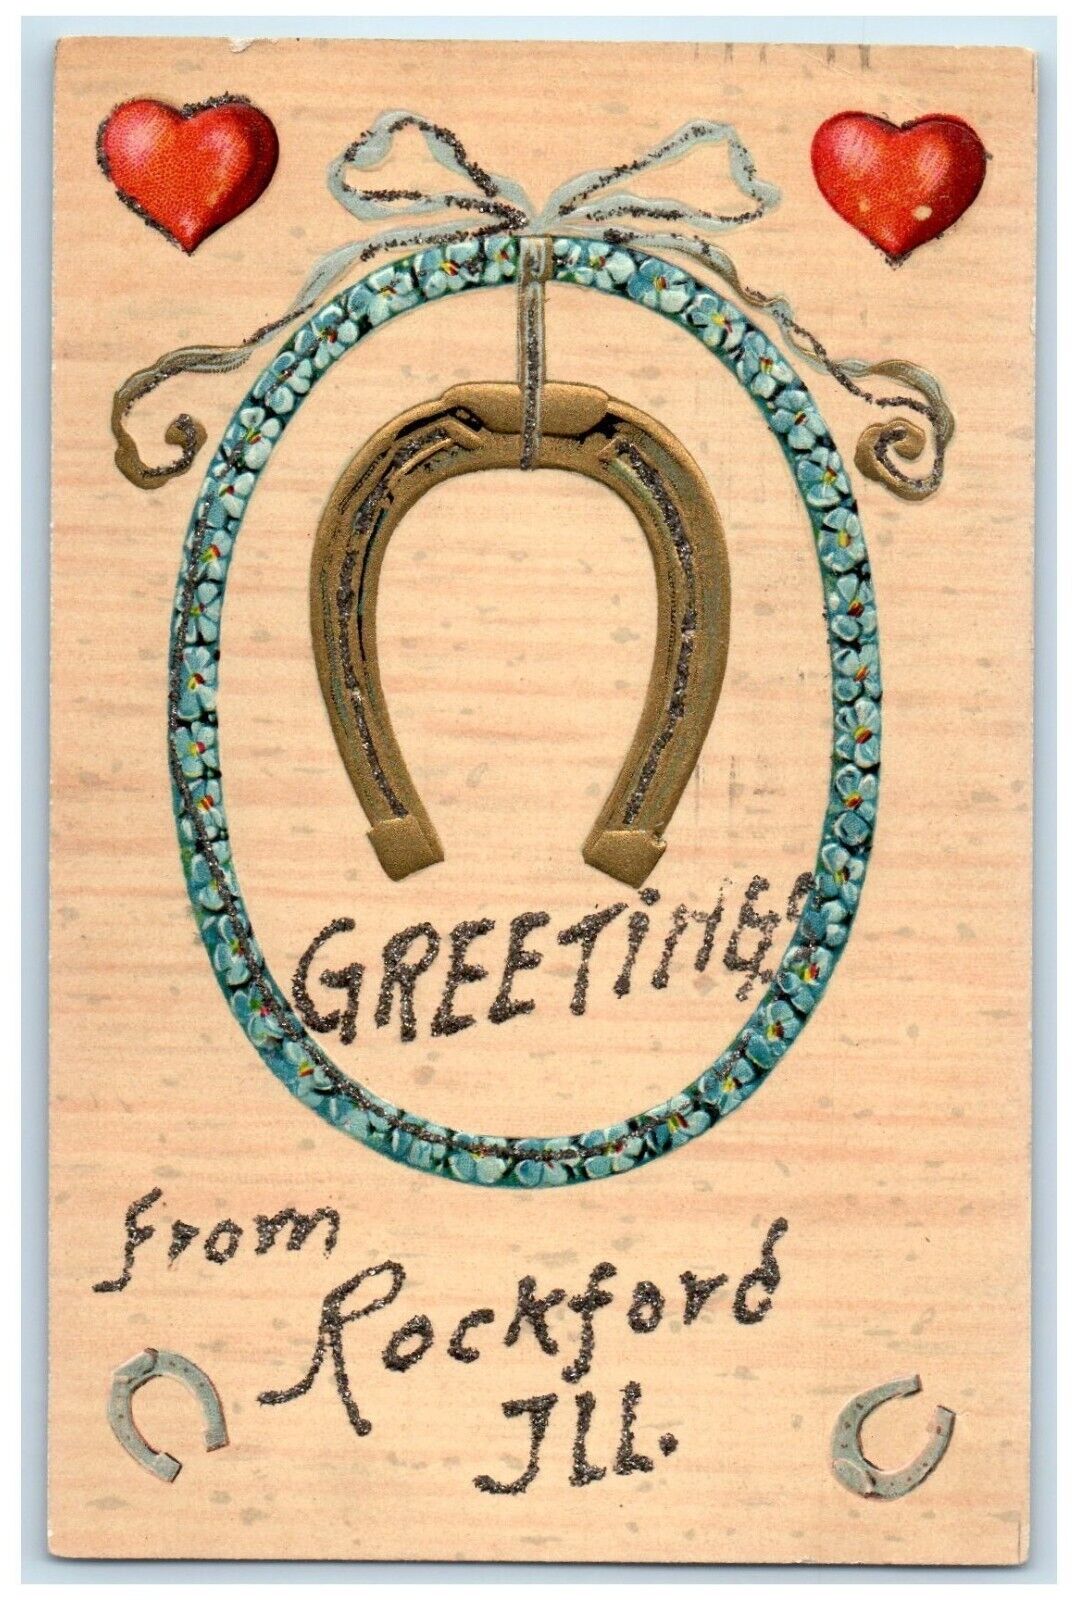 1911 Greetings From Rockford Illinois Embossed Glitter Horseshoe Posted Postcard